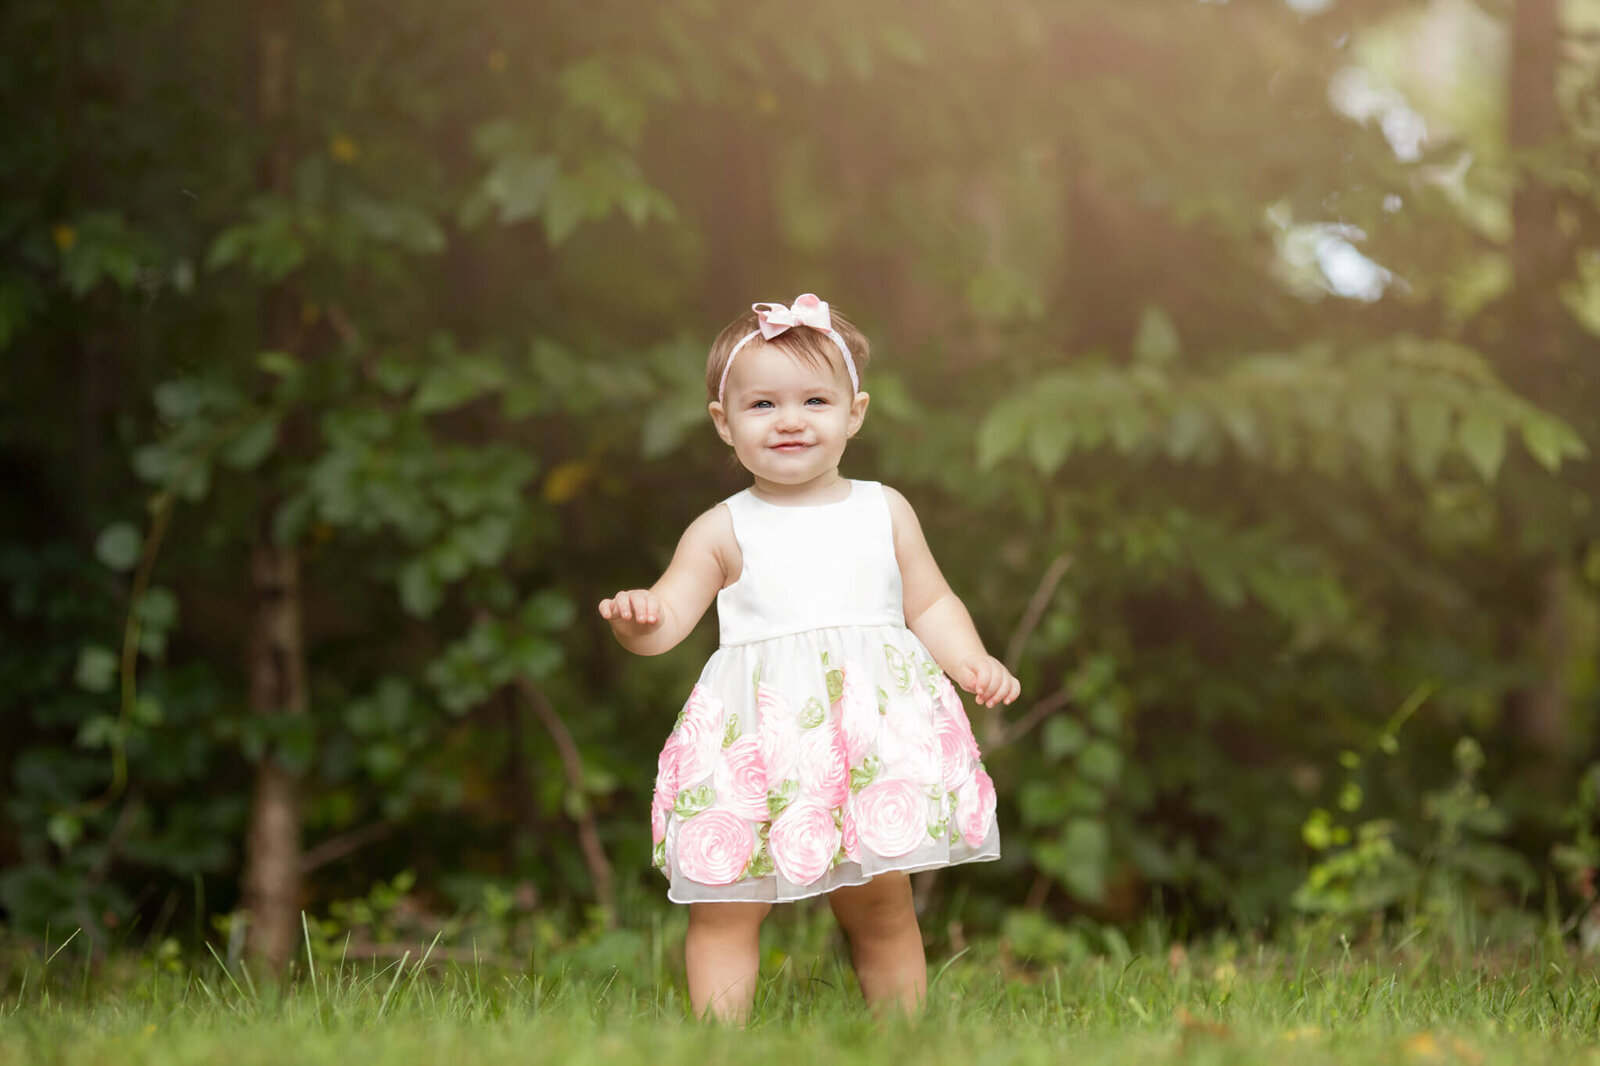 One year birthday photoshoot of little girl wearing a white dress with pink flowers